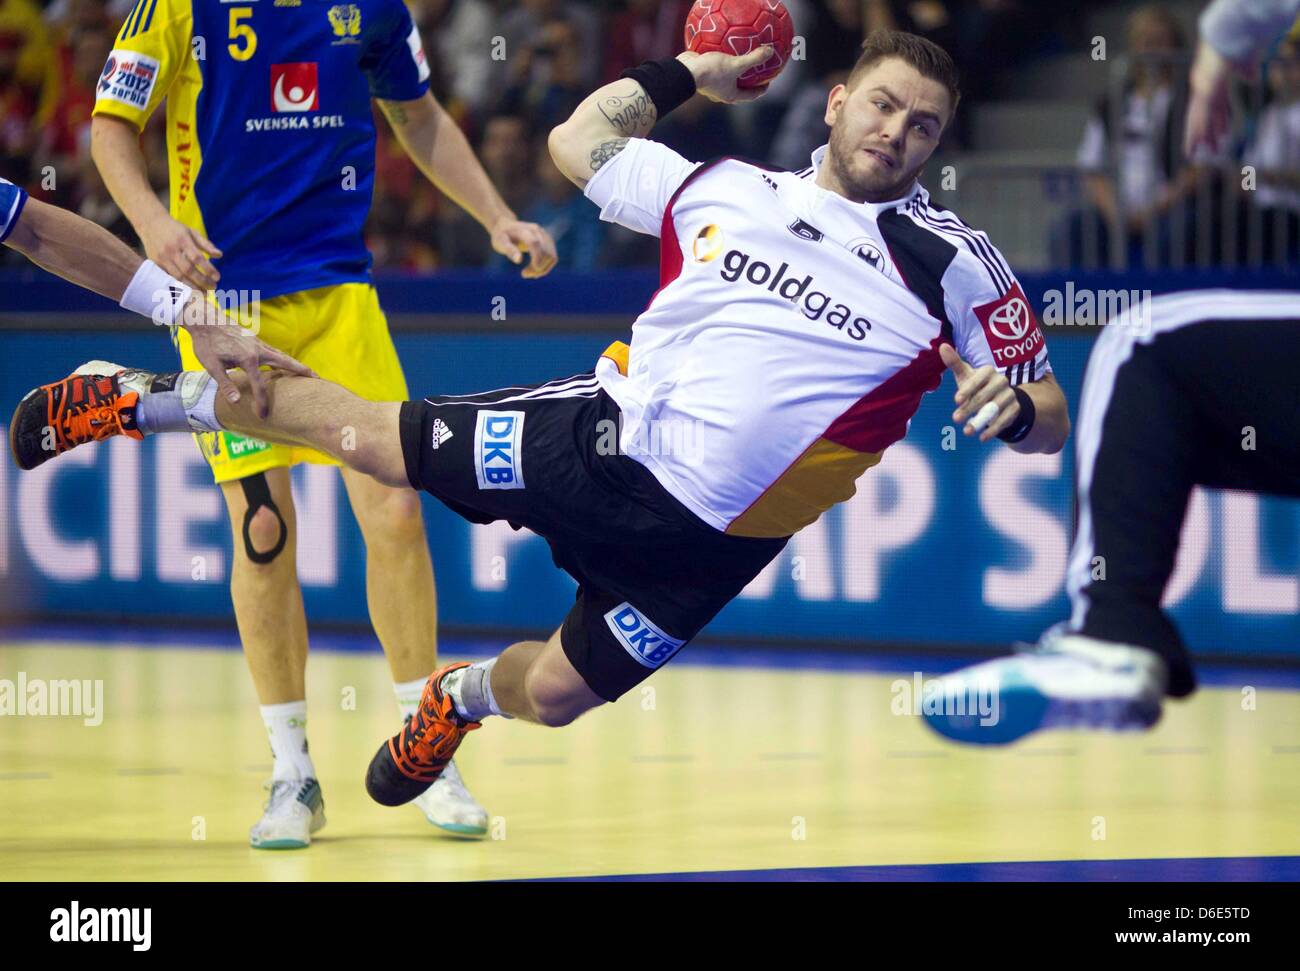 Germany's Christoph Theuerkauf attempts a jump shot during the Handball  European Championship group B match between Germany and Sweden in Nis, Serbia, 19 January 2012. Photo: Jens Wolf Stock Photo